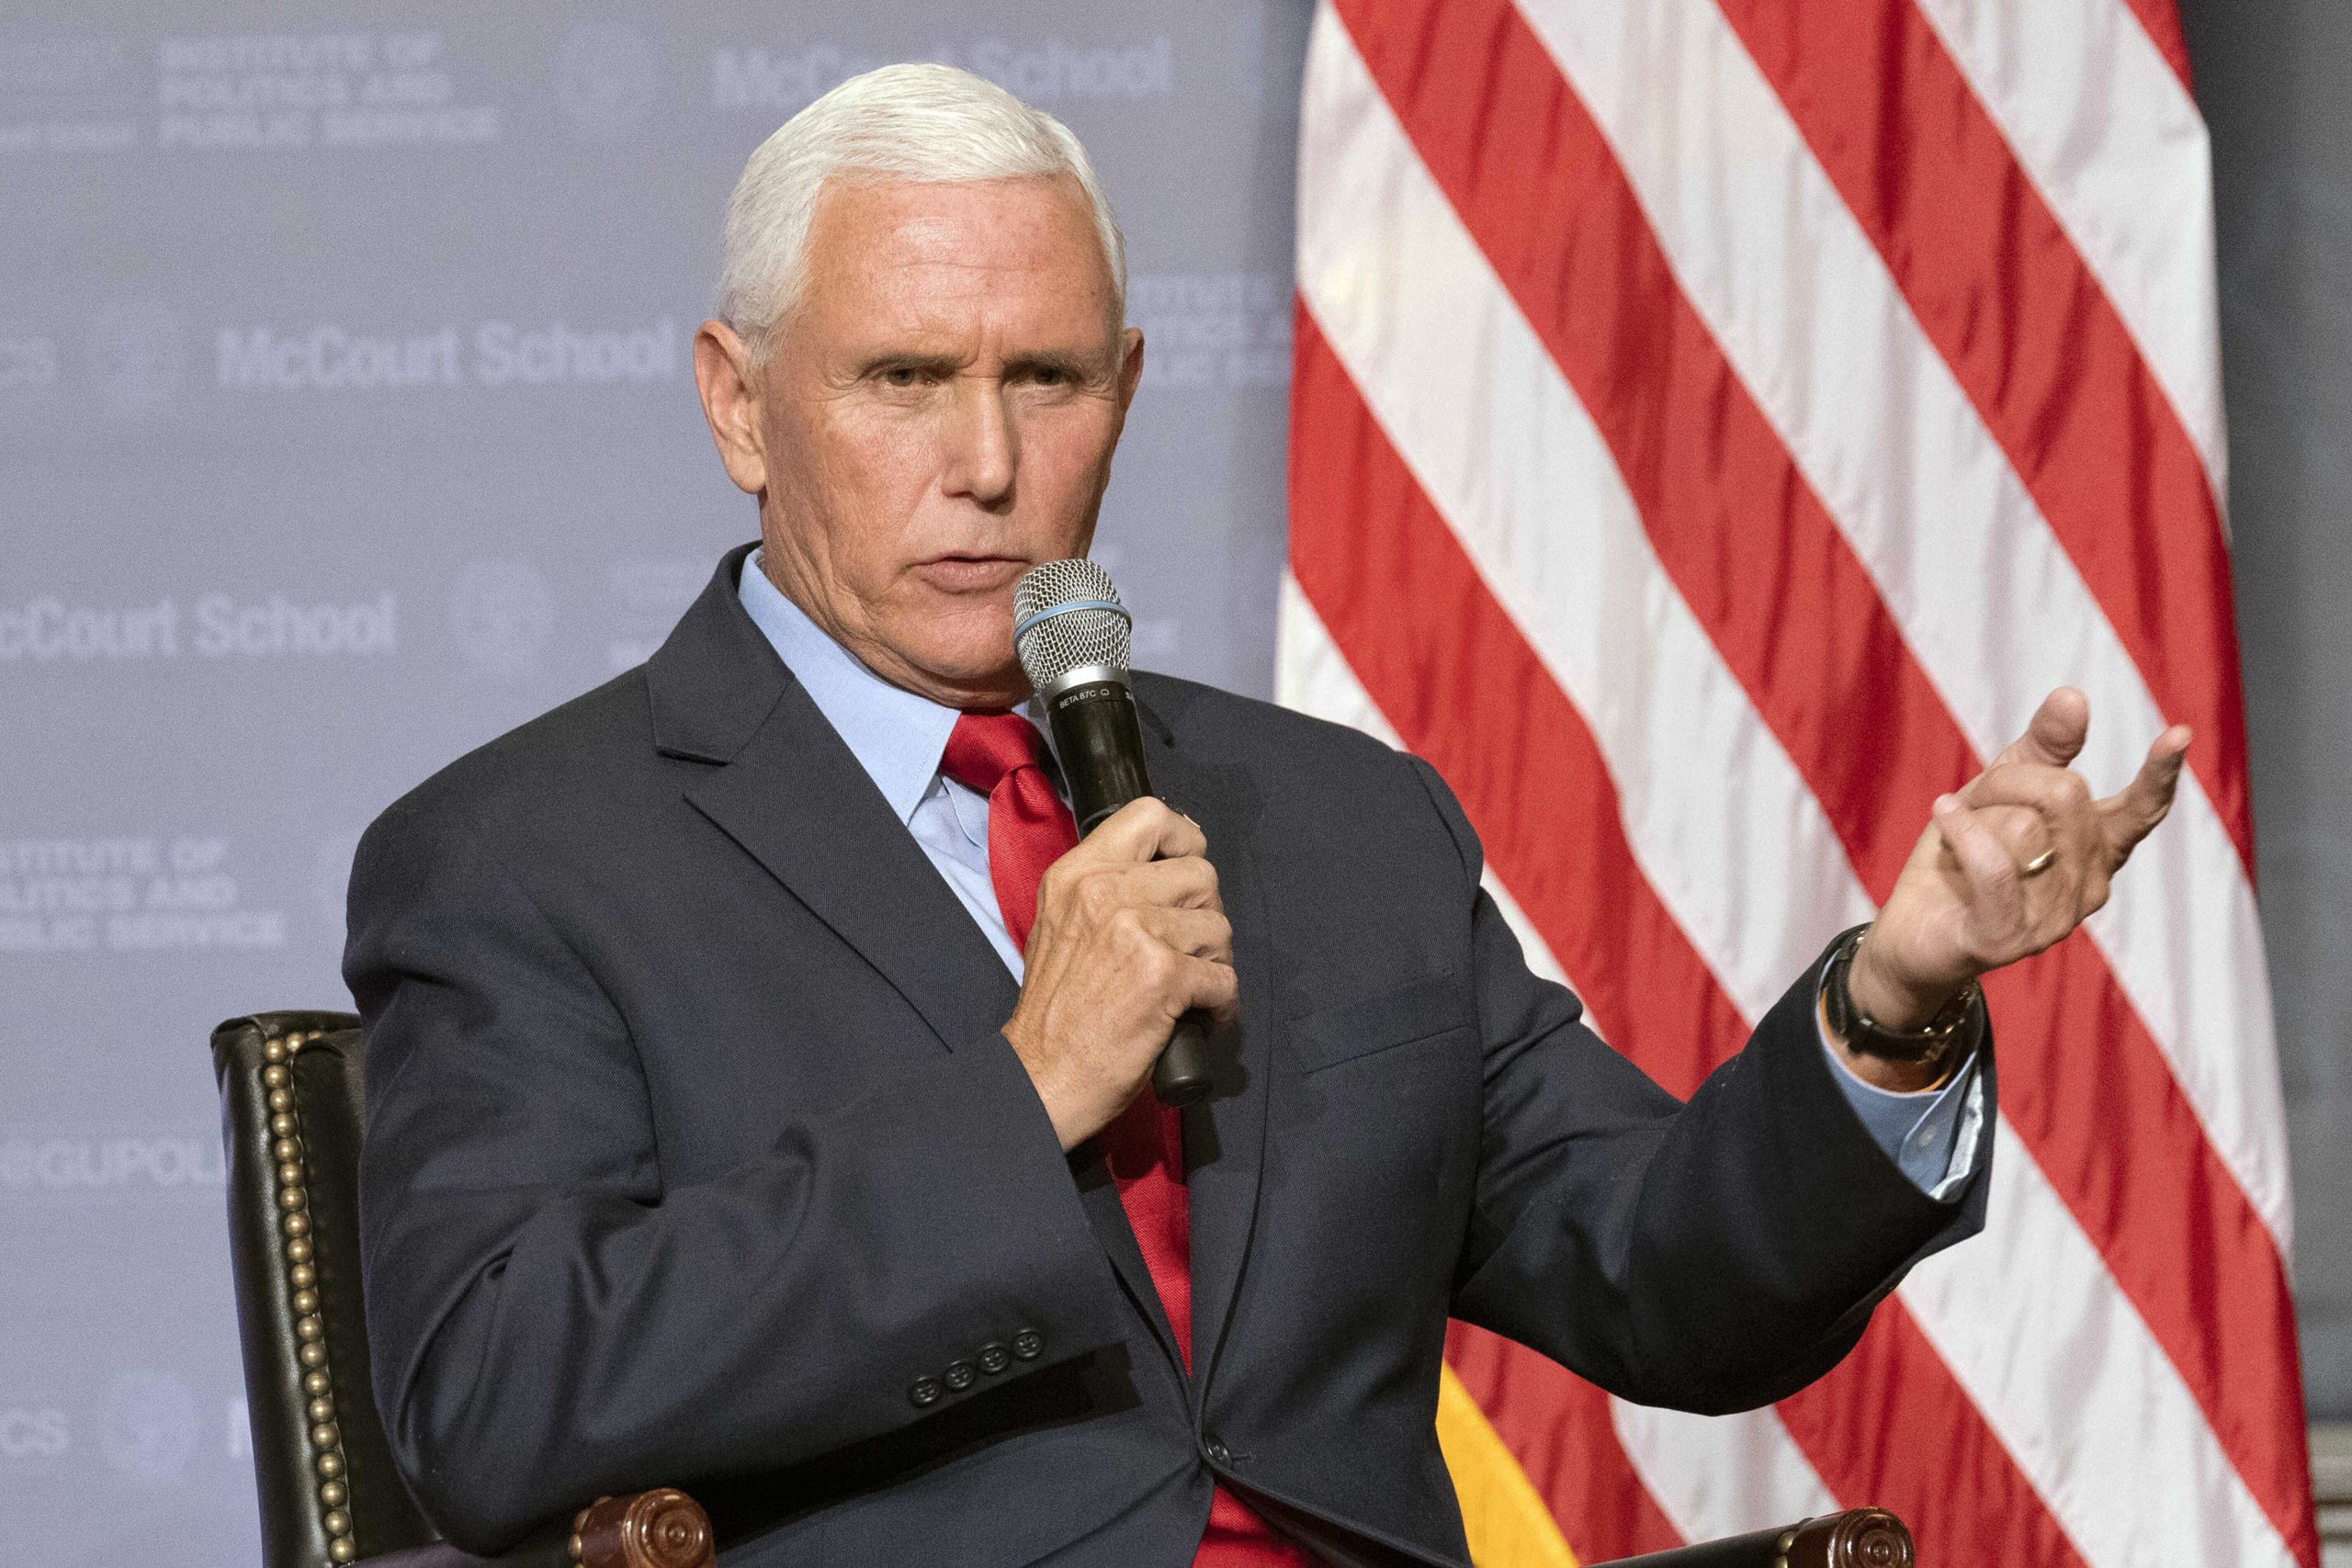 The home of former Vice President Mike Pence, seen in a file photo from October, is the focus of an FBI search, an anonymous source told the Associated Press.